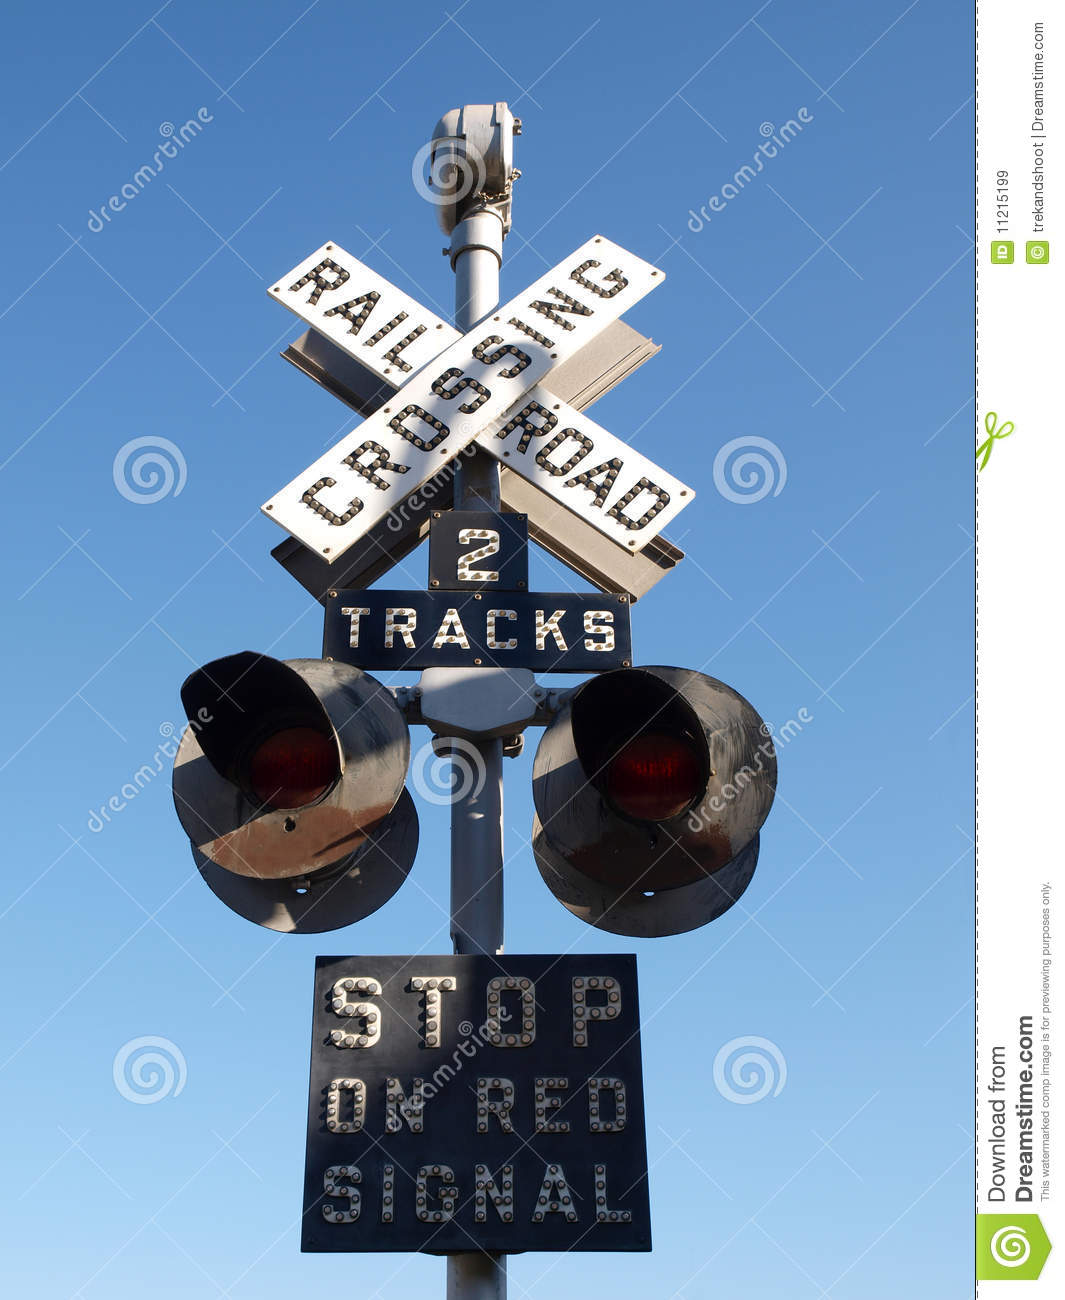 Vintage Railroad Signal Royalty Free Stock Images   Image  11215199